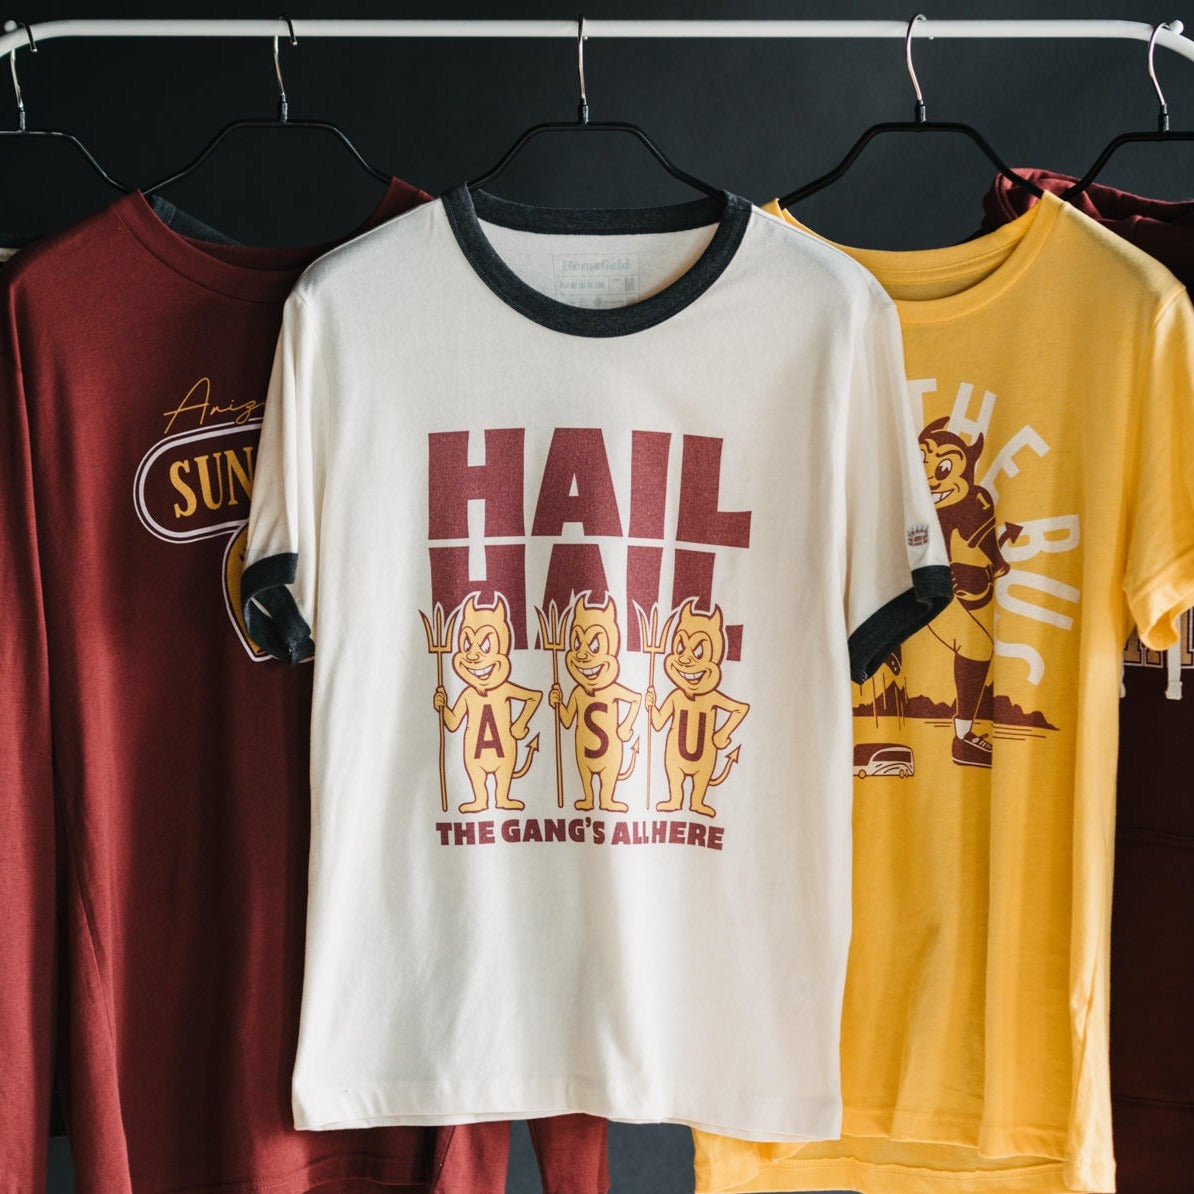 ASU "The Gang's All Here" Ringer Tee